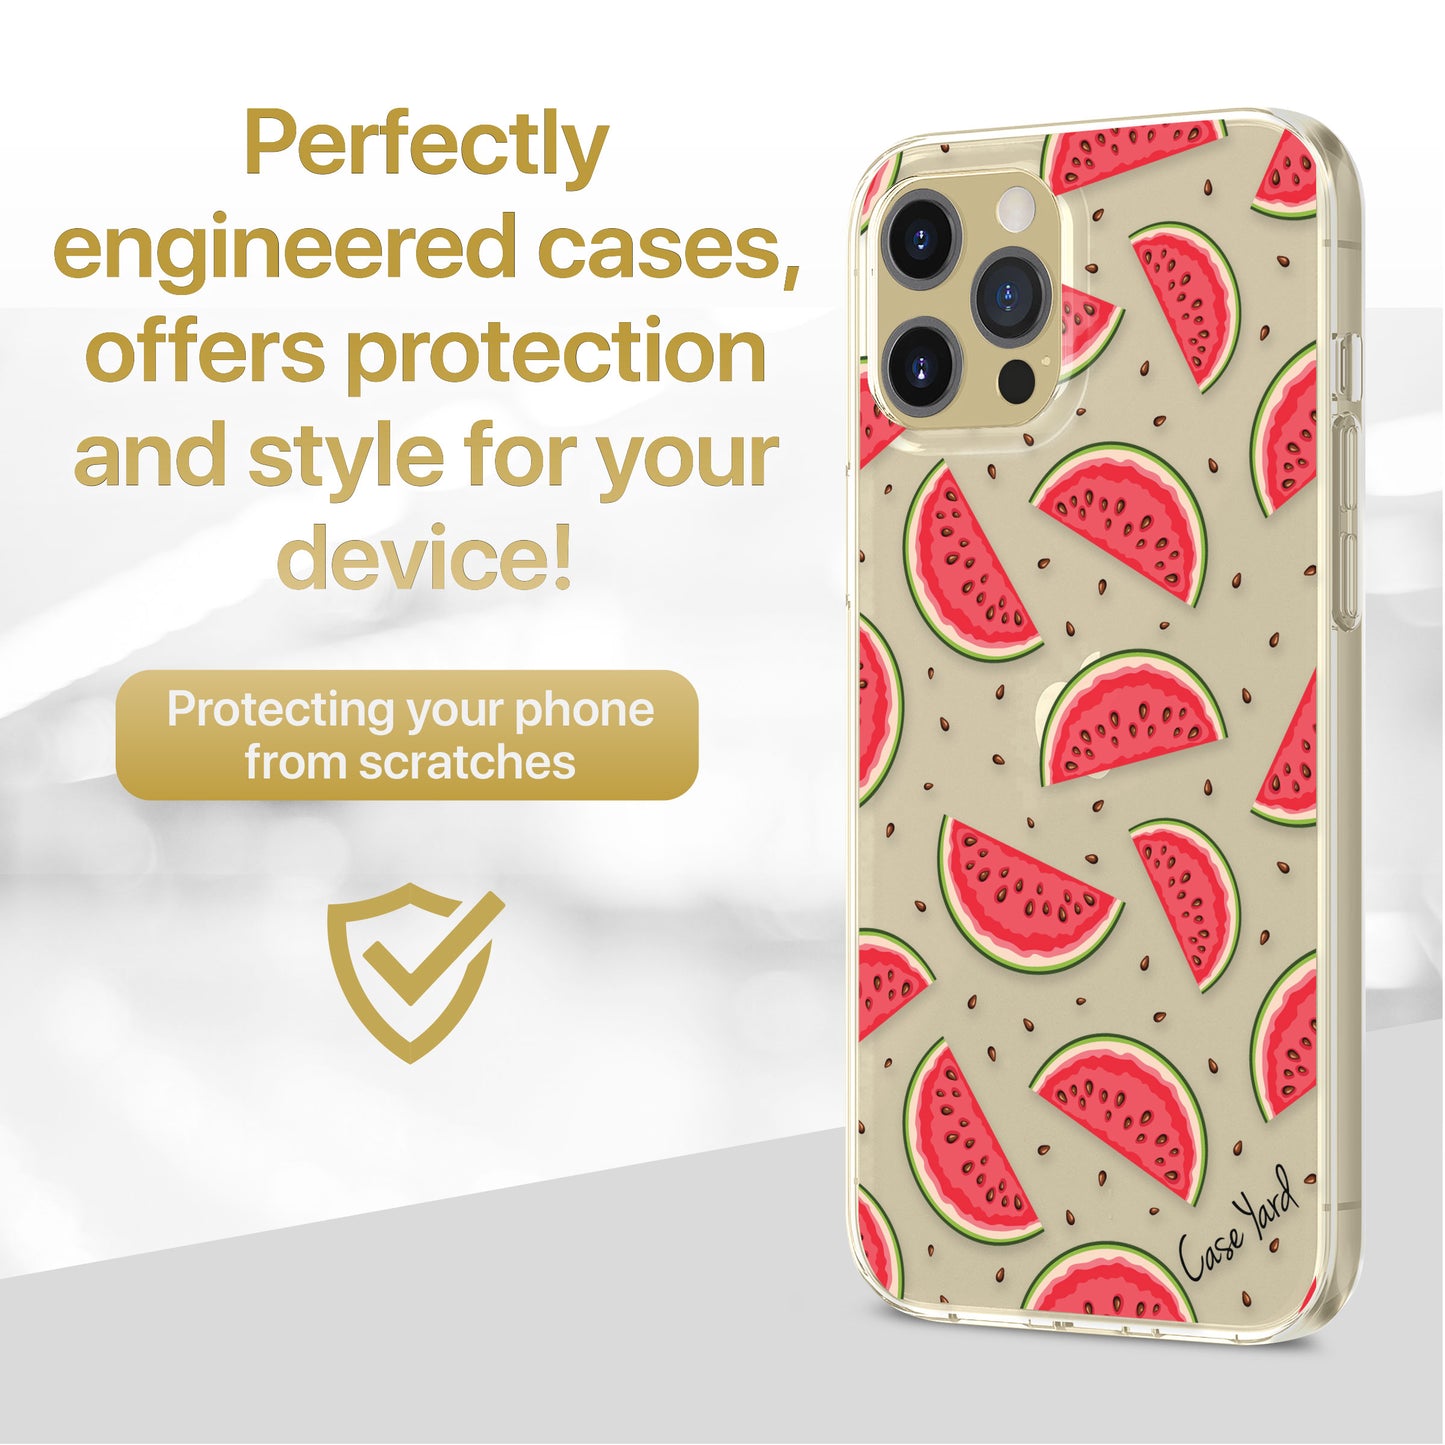 TPU Clear case with (Watermelon) Design for iPhone & Samsung Phones